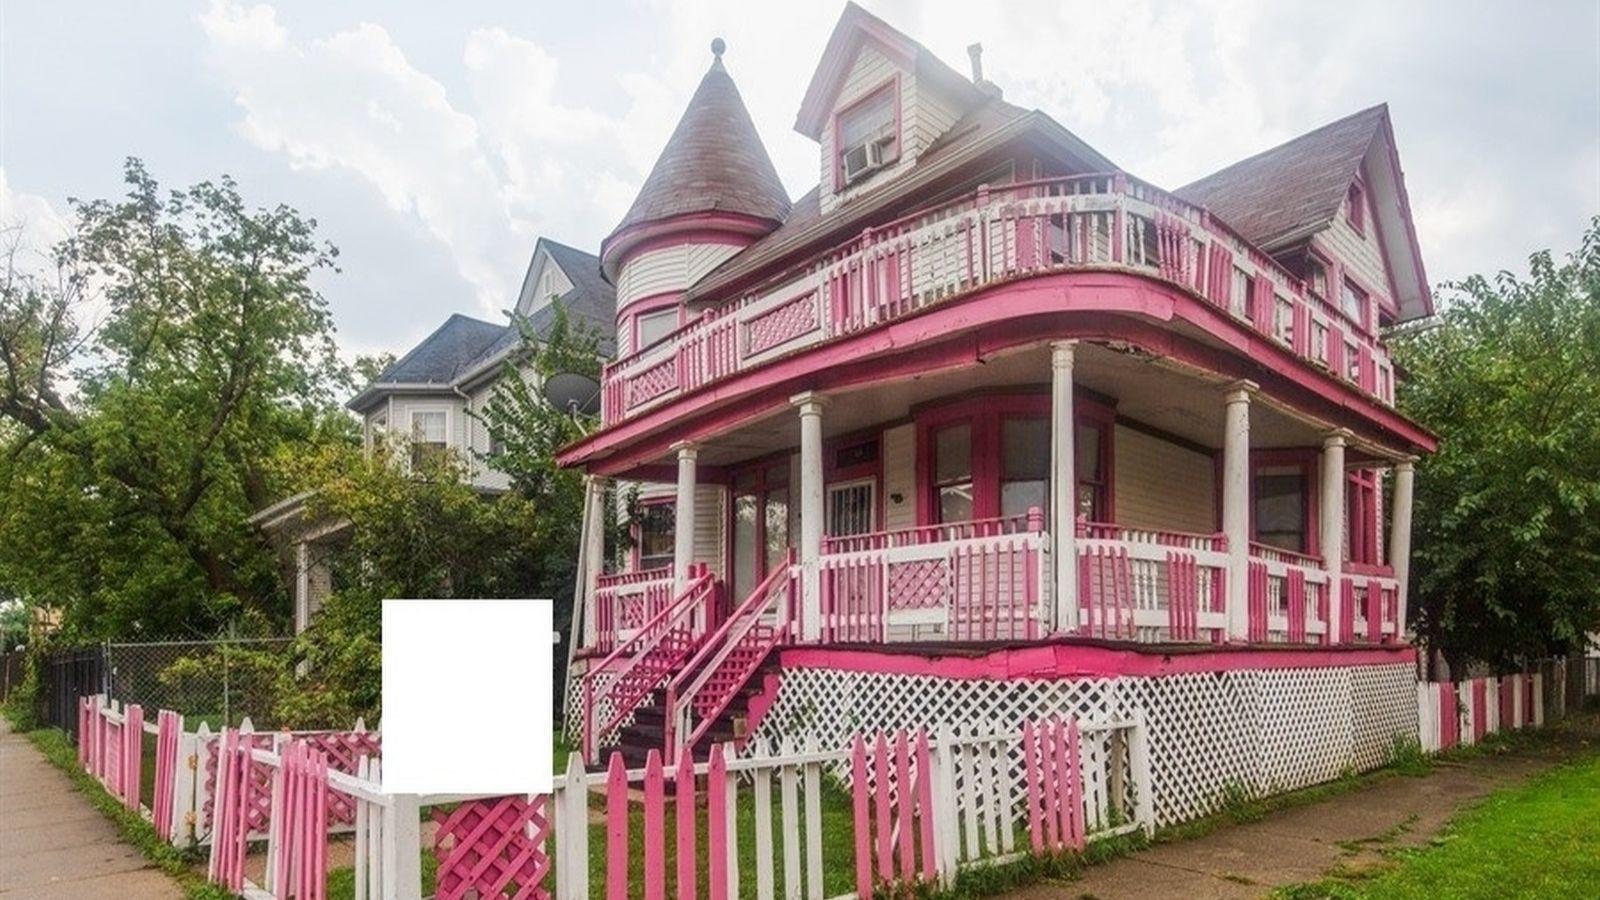 Barbie's Chicago Dreamhouse? Well-known pink Victorian home hits market